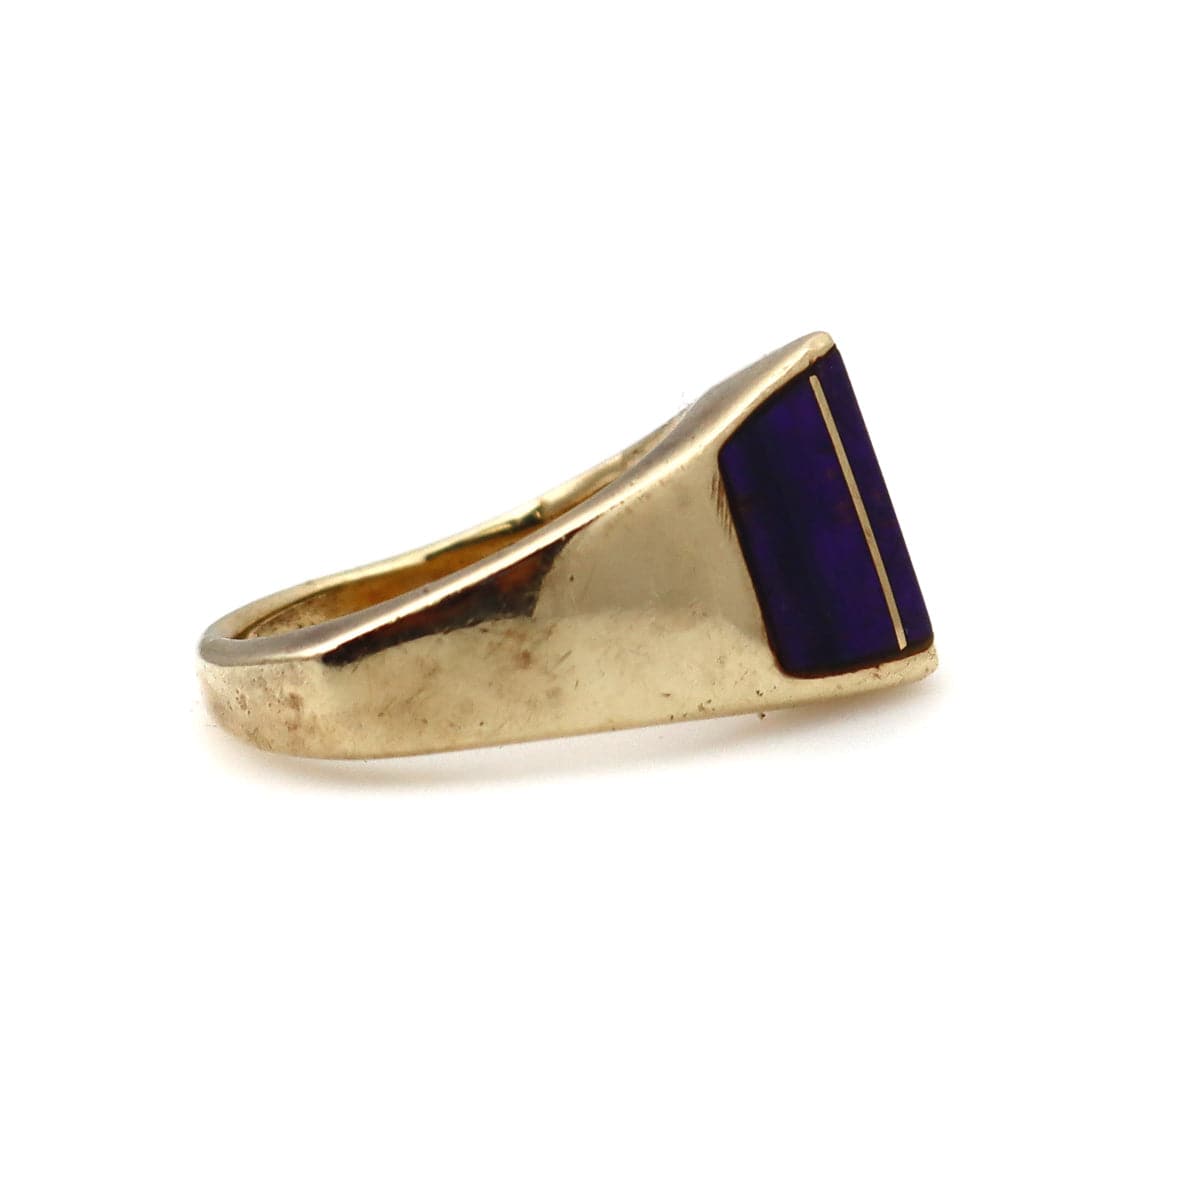 Andy Lee Kirk (1947-2001) - Isleta/Navajo Contemporary Sugilite, Opal, and 14K Gold Asymmetrical Ring, size 5 (J91963-0721-005) 1
